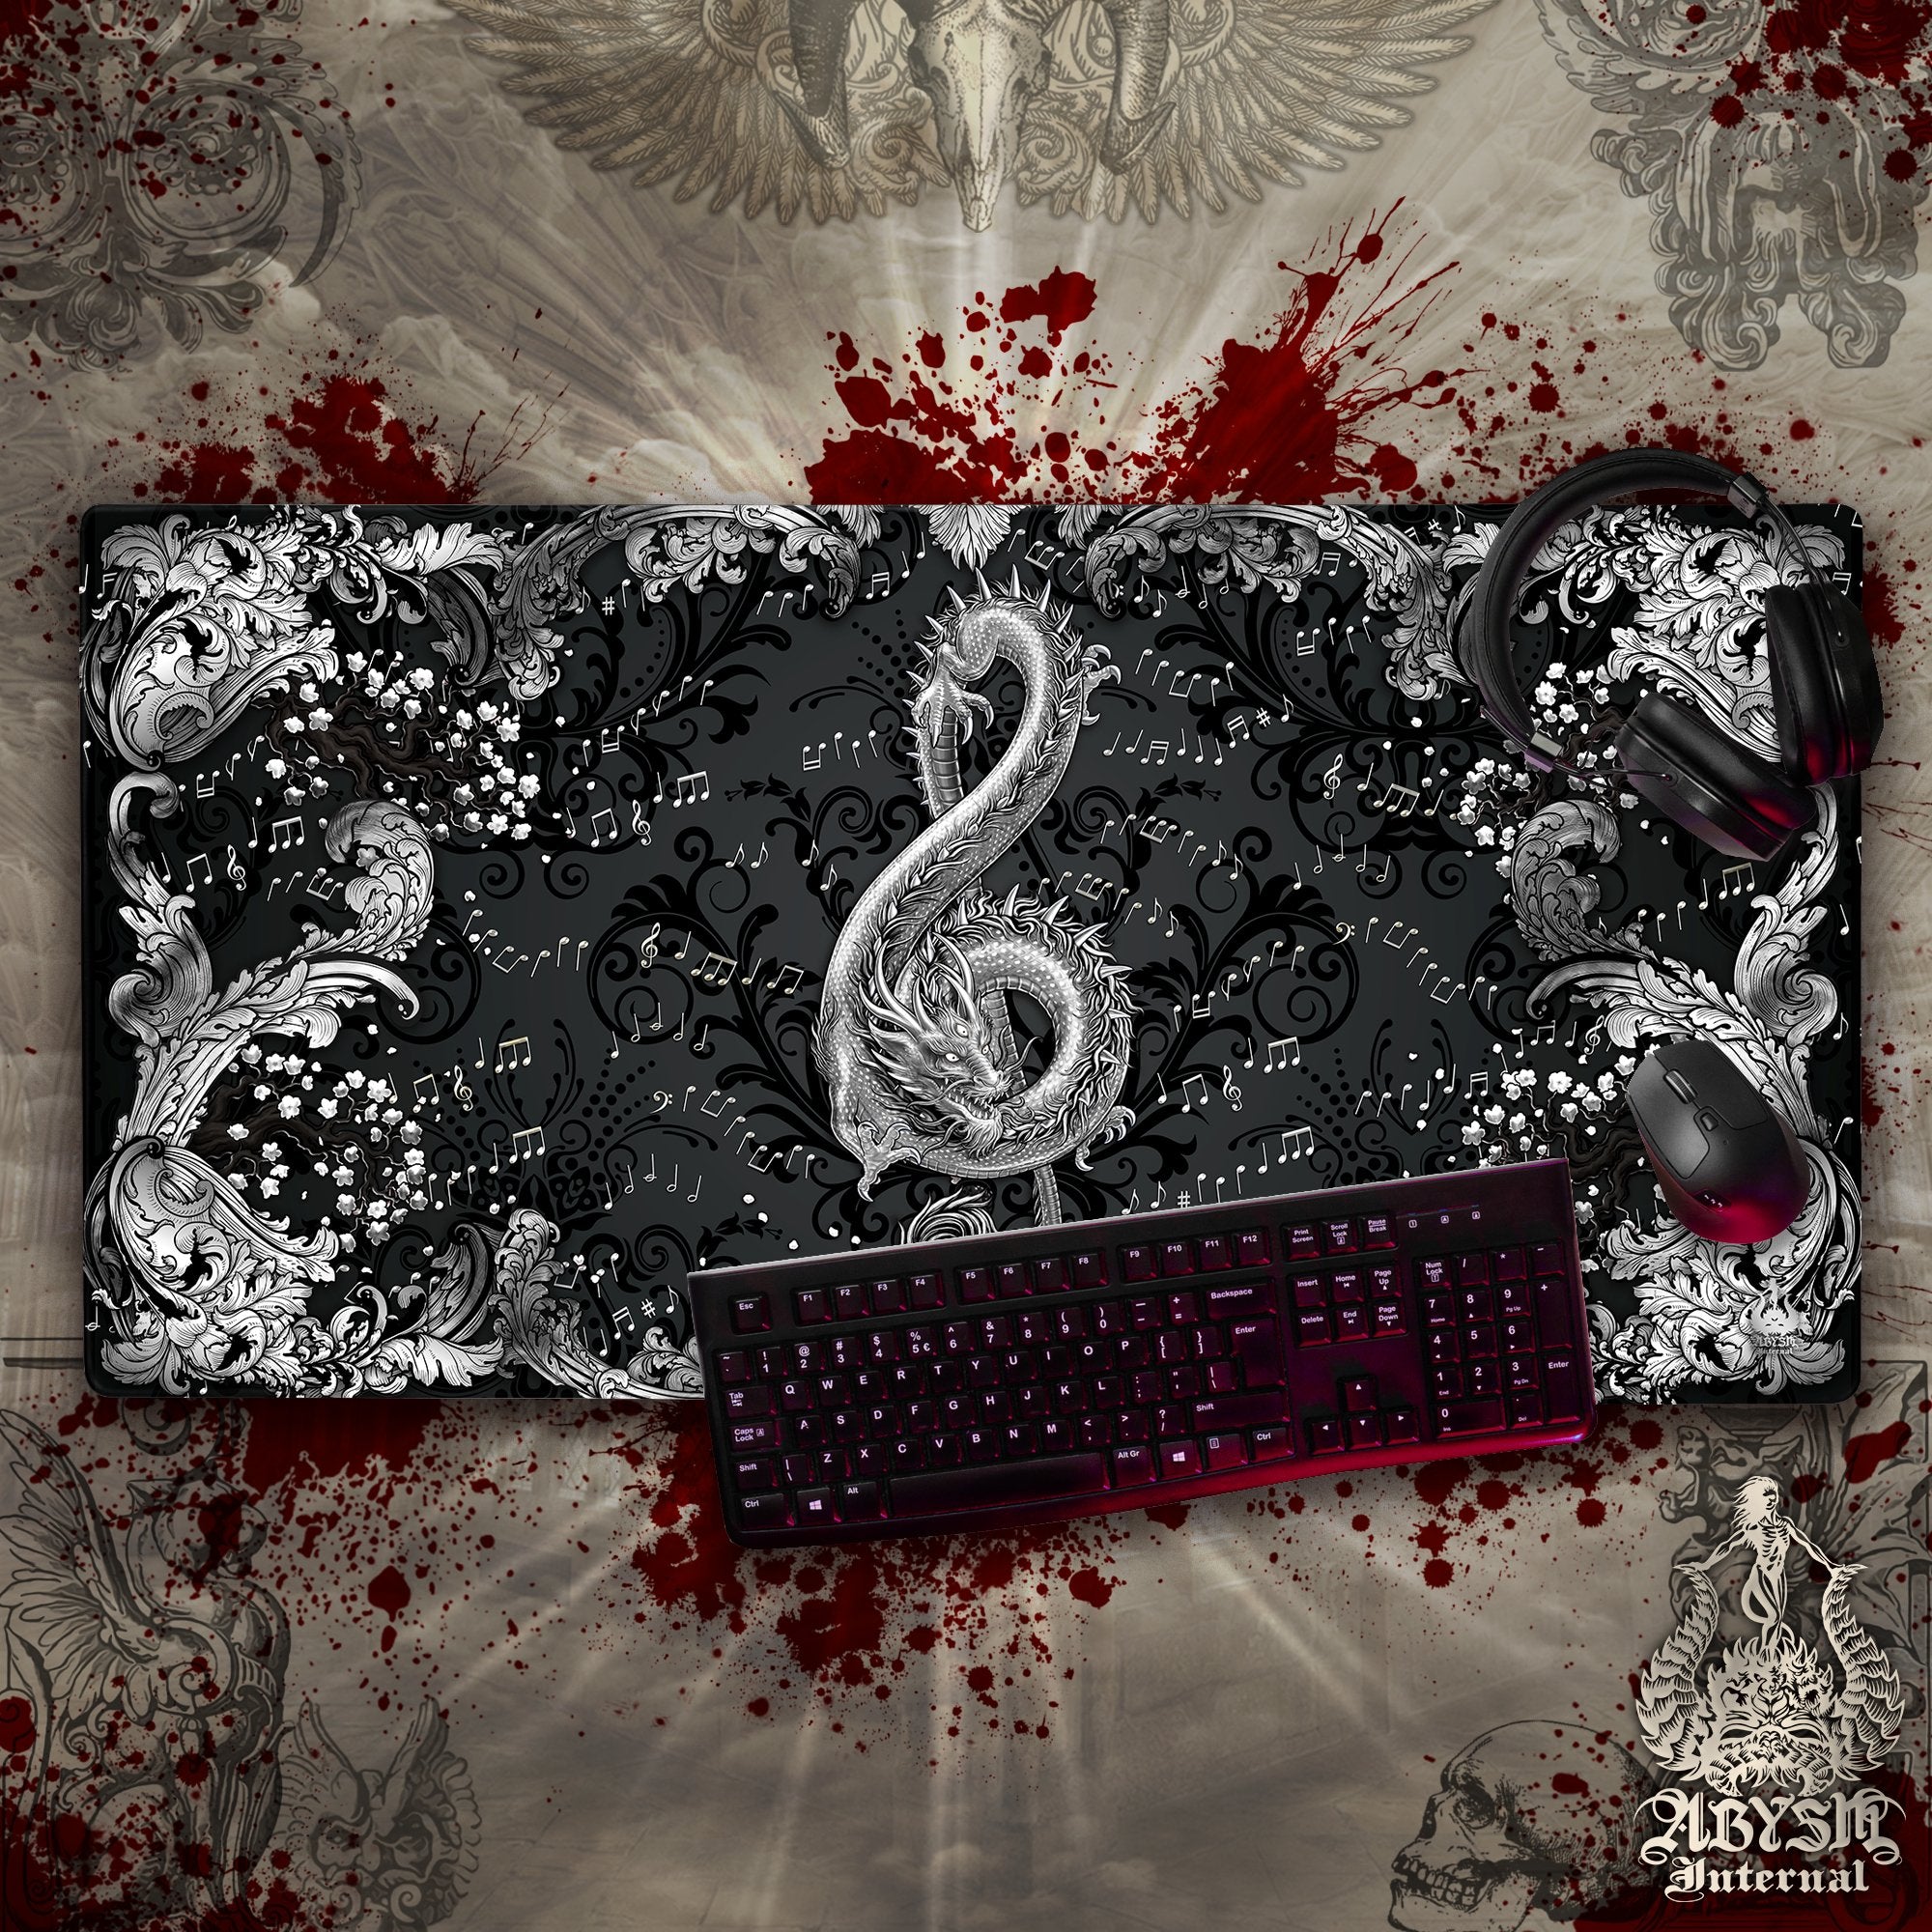 Silver Music Mouse Pad, Dragon Gaming Desk Mat, Asian Workpad, Ornamented Table Protector Cover, Treble Clef Art Print - 2 Colors - Abysm Internal